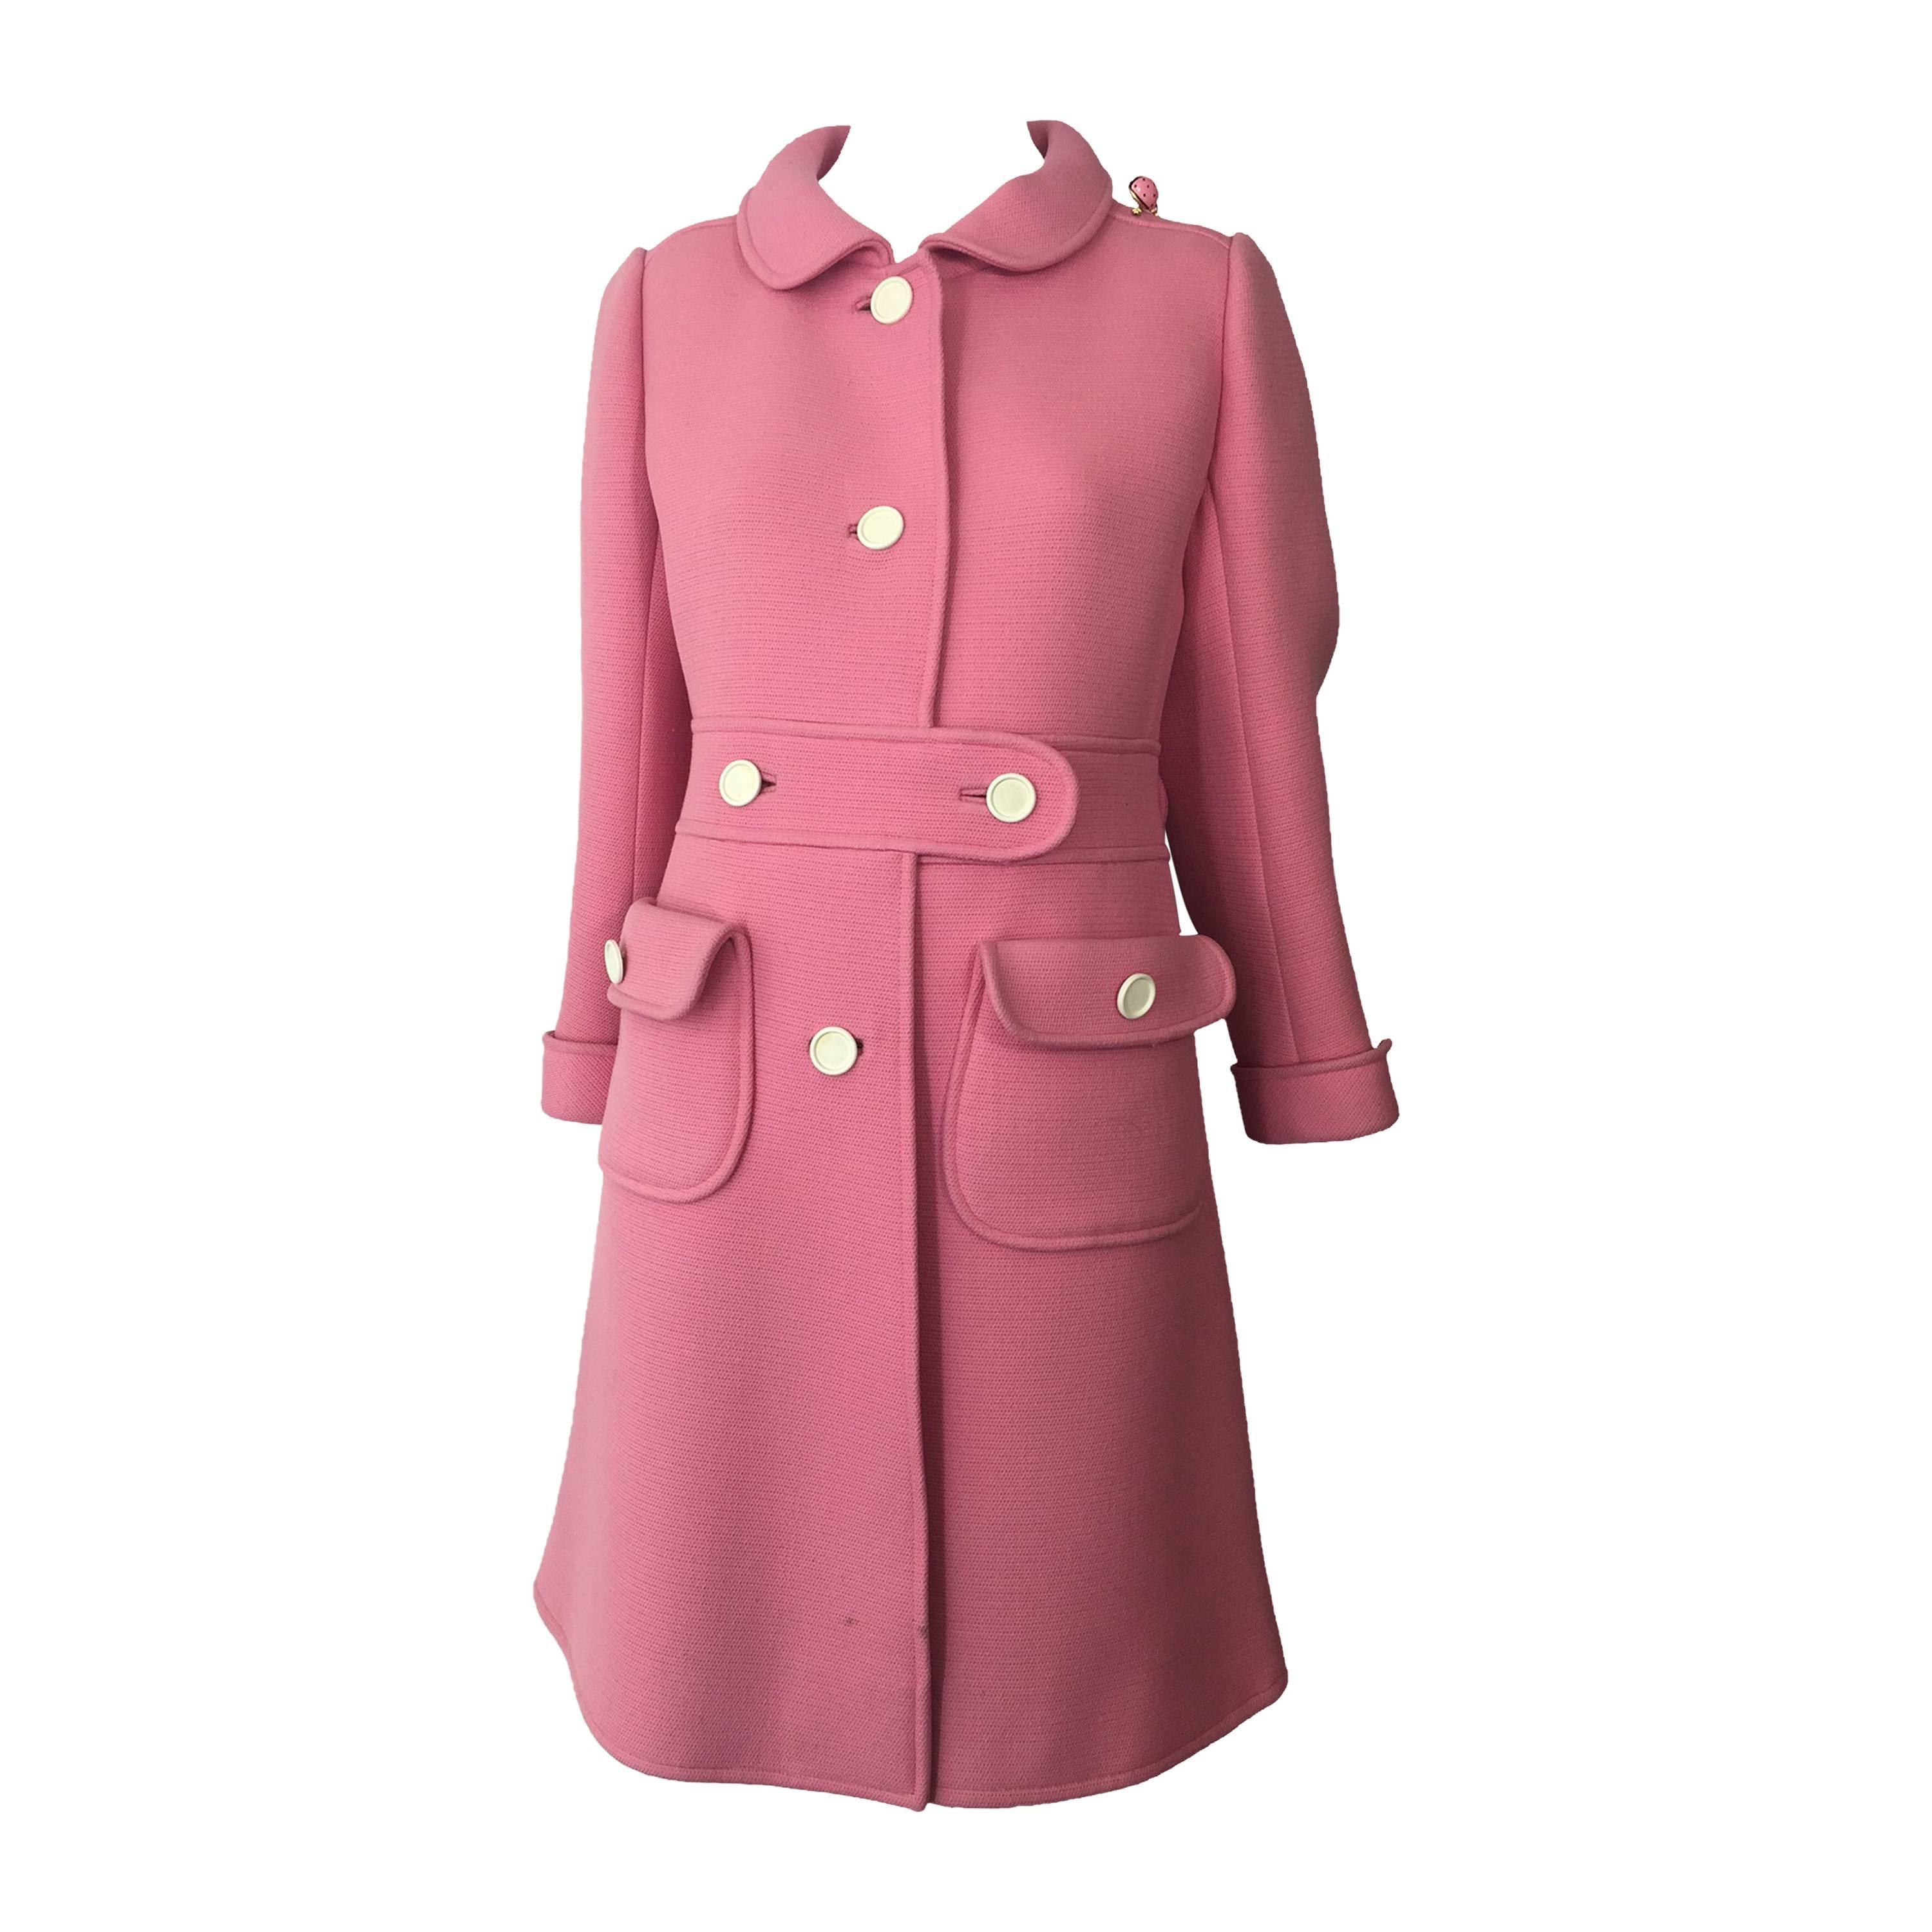 1960s Courreges Pink Wool Mod Coat with White Buttons